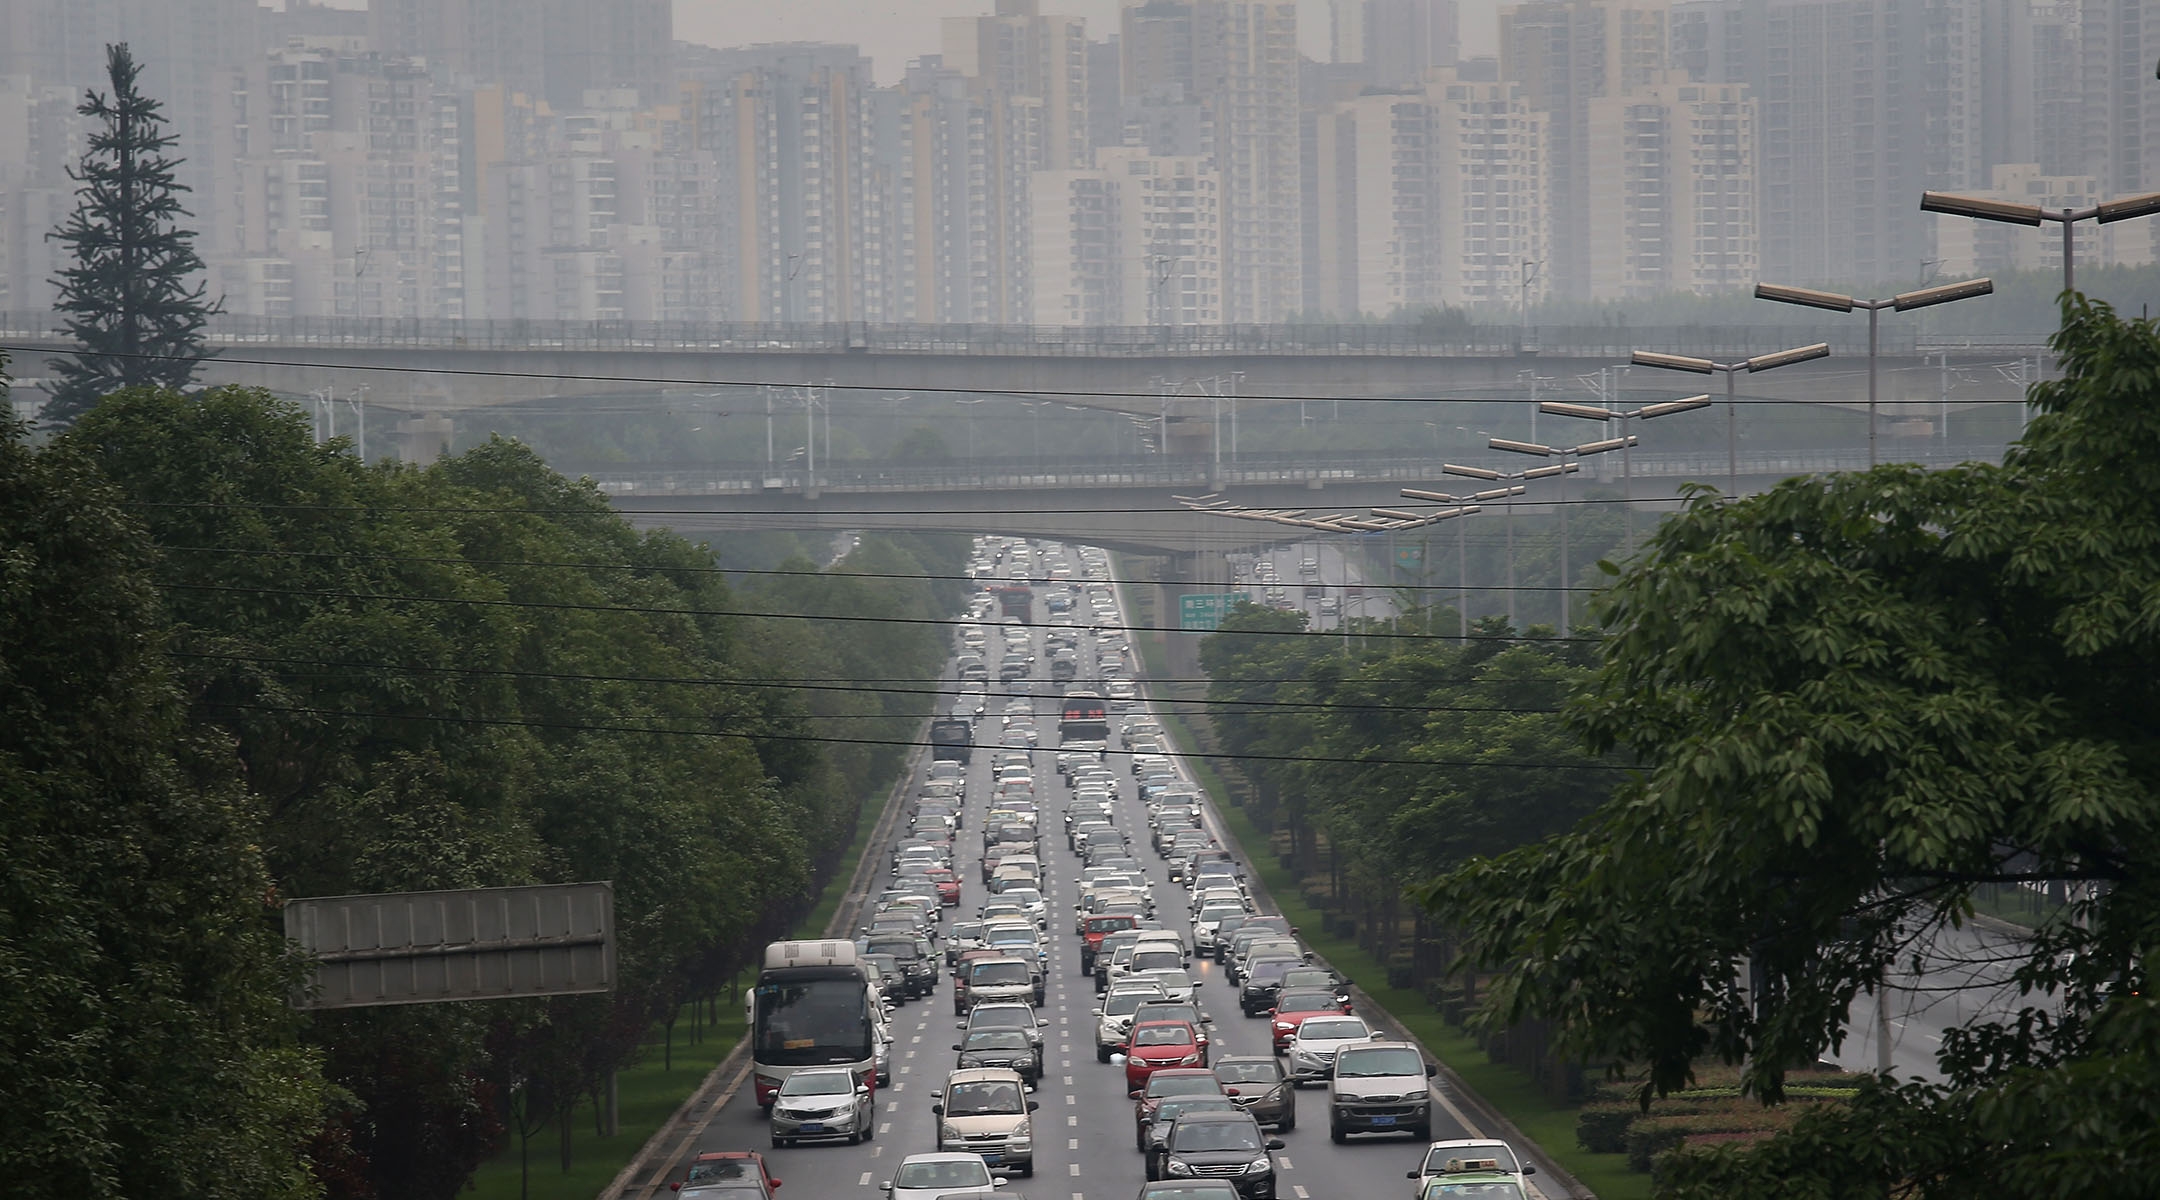 Commuter traffic flows from a skyline of apartment buildings in Chengdu, China, June 30, 2015. (John Moore/Getty Images)